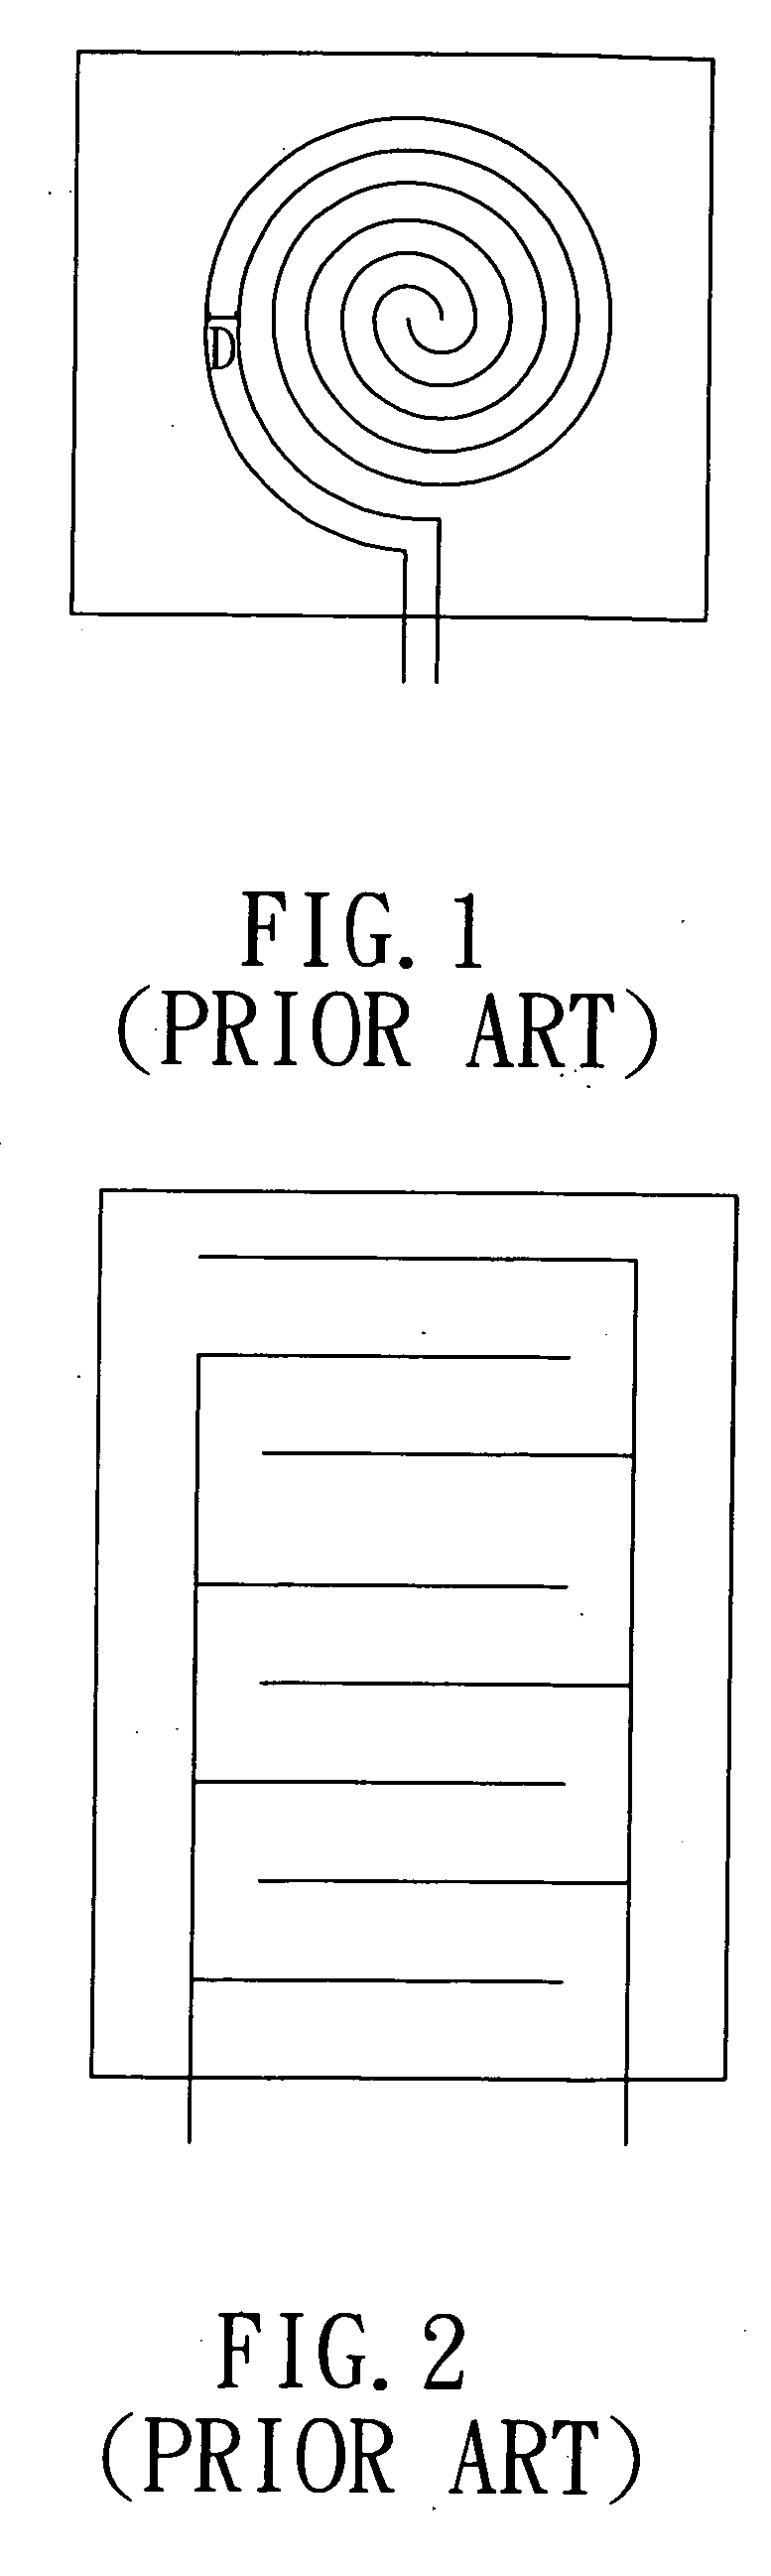 Apparatus for induced capacitor